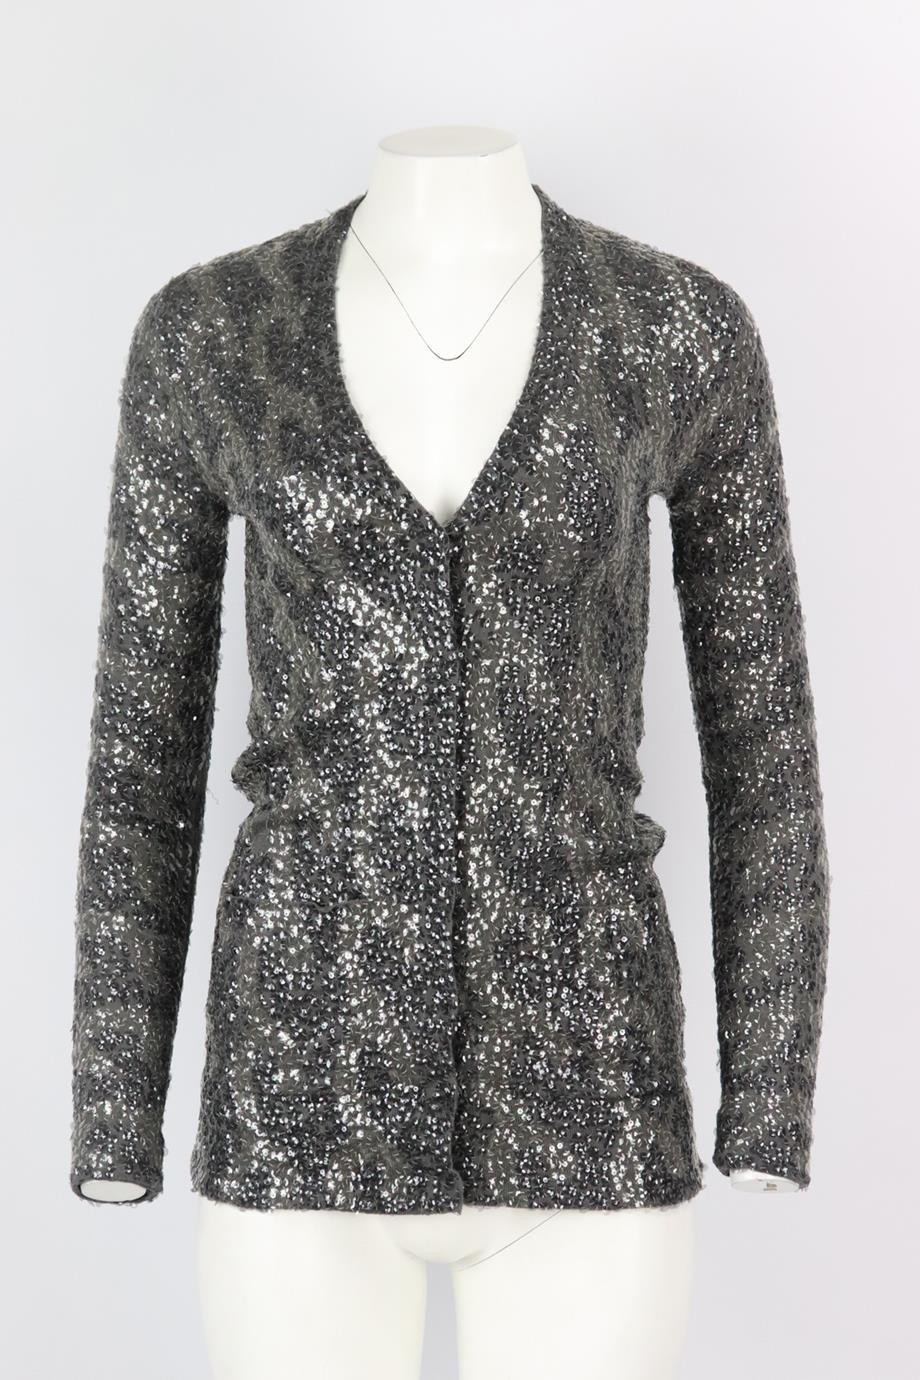 Burberry sequined wool cardigan. Grey. Long sleeve, v-neck. Button fastening at front. 100% Wool. Size: XSmall (UK 6, US 2, FR 34, IT 38). Bust: 30 in. Waist: 26 in. Hips: 32 in. Length: 29.5 in. Very good condition - Some sequins missing; see